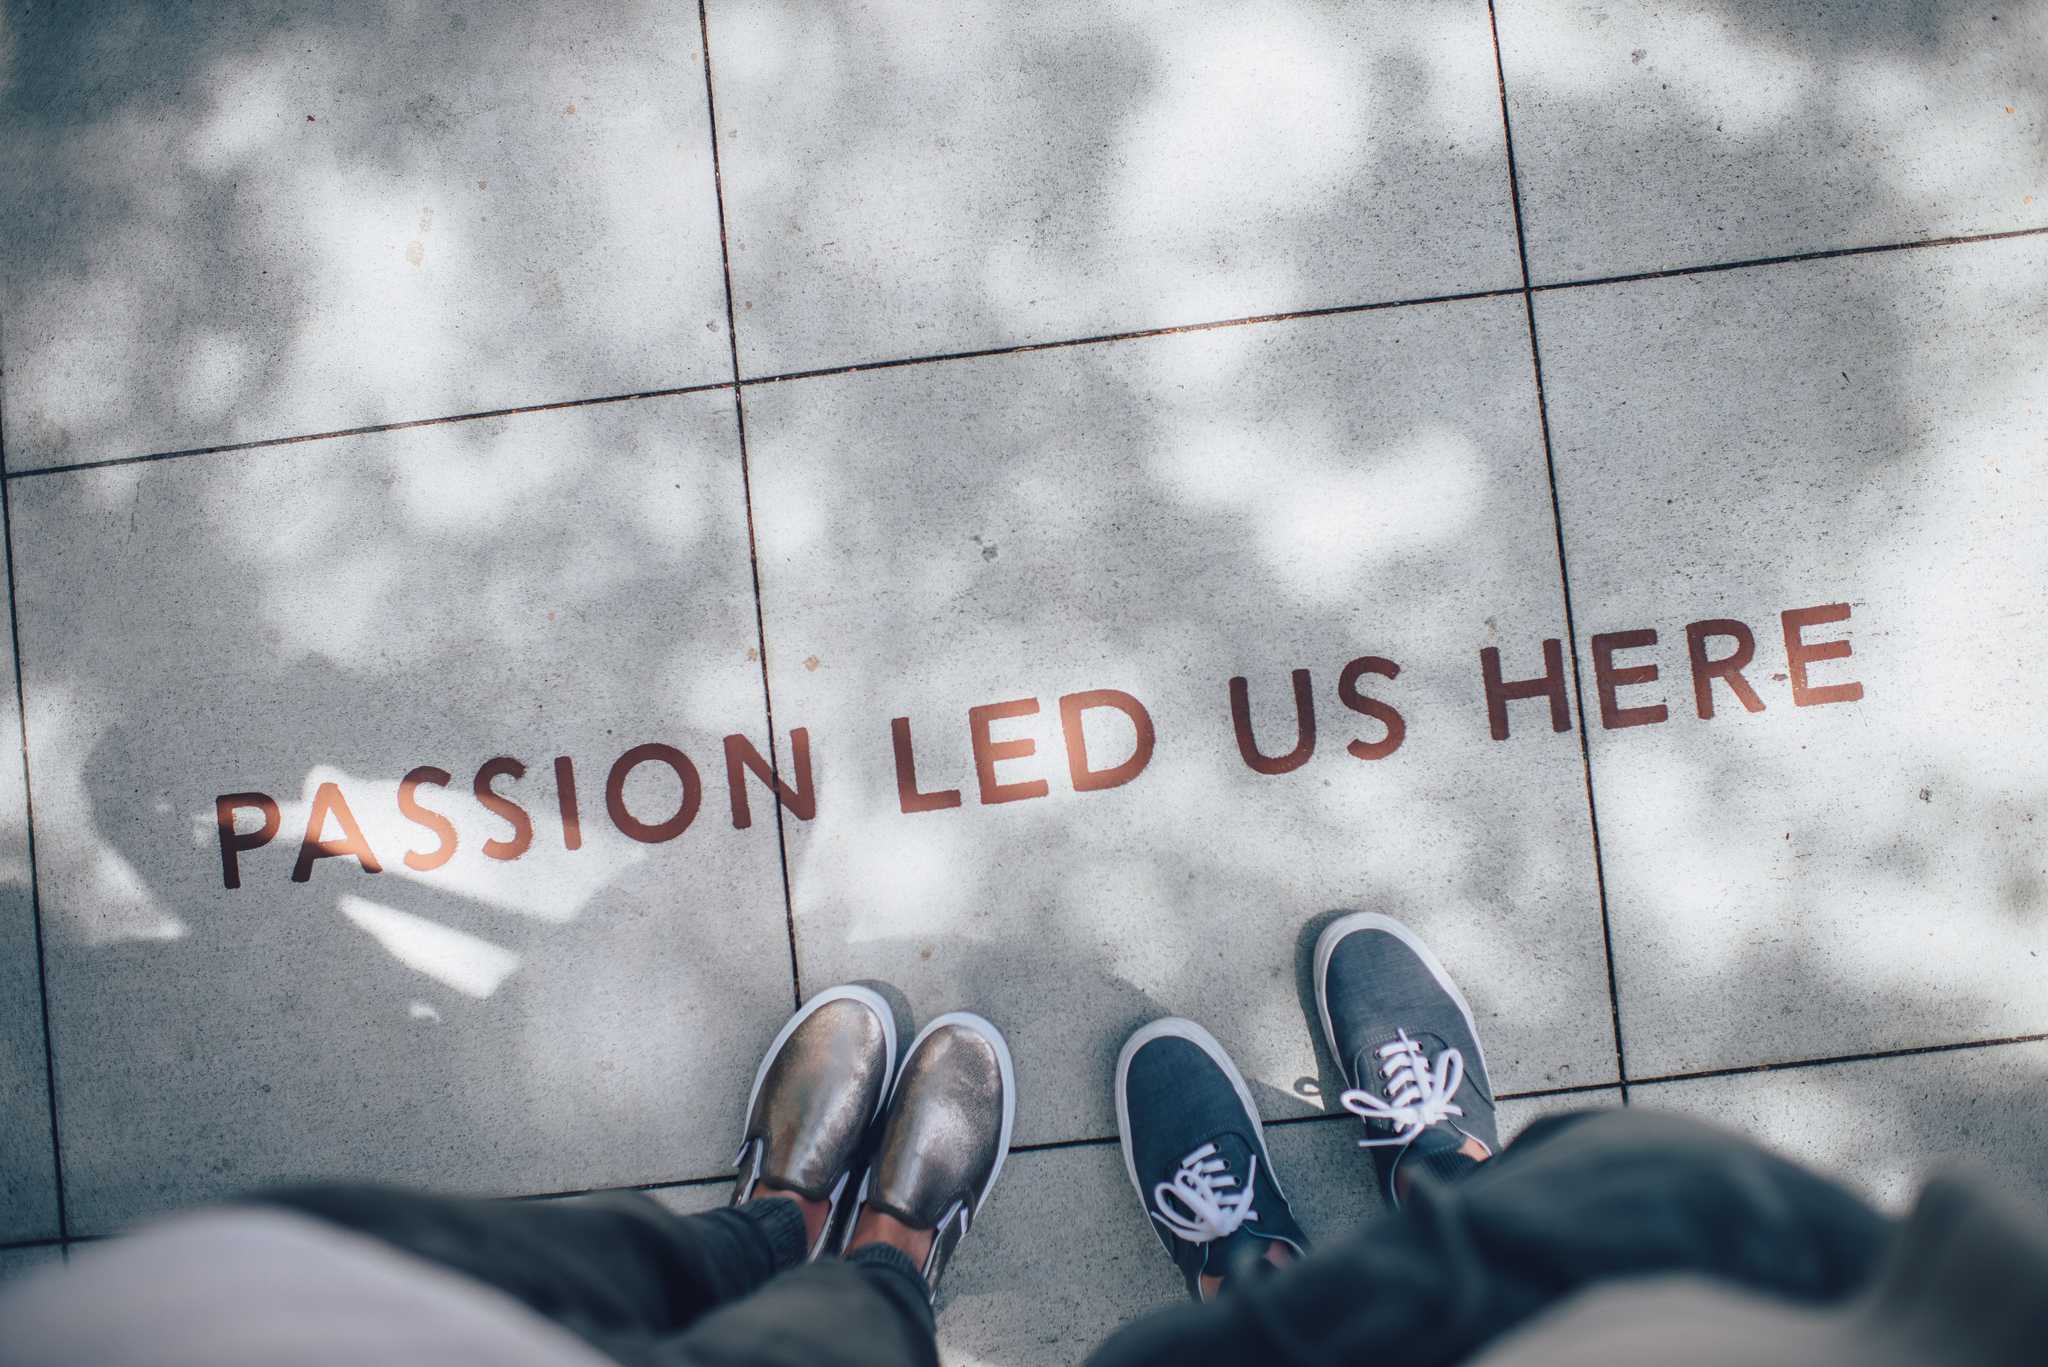 two people stand over "passion led us here" painted on the sidewalk